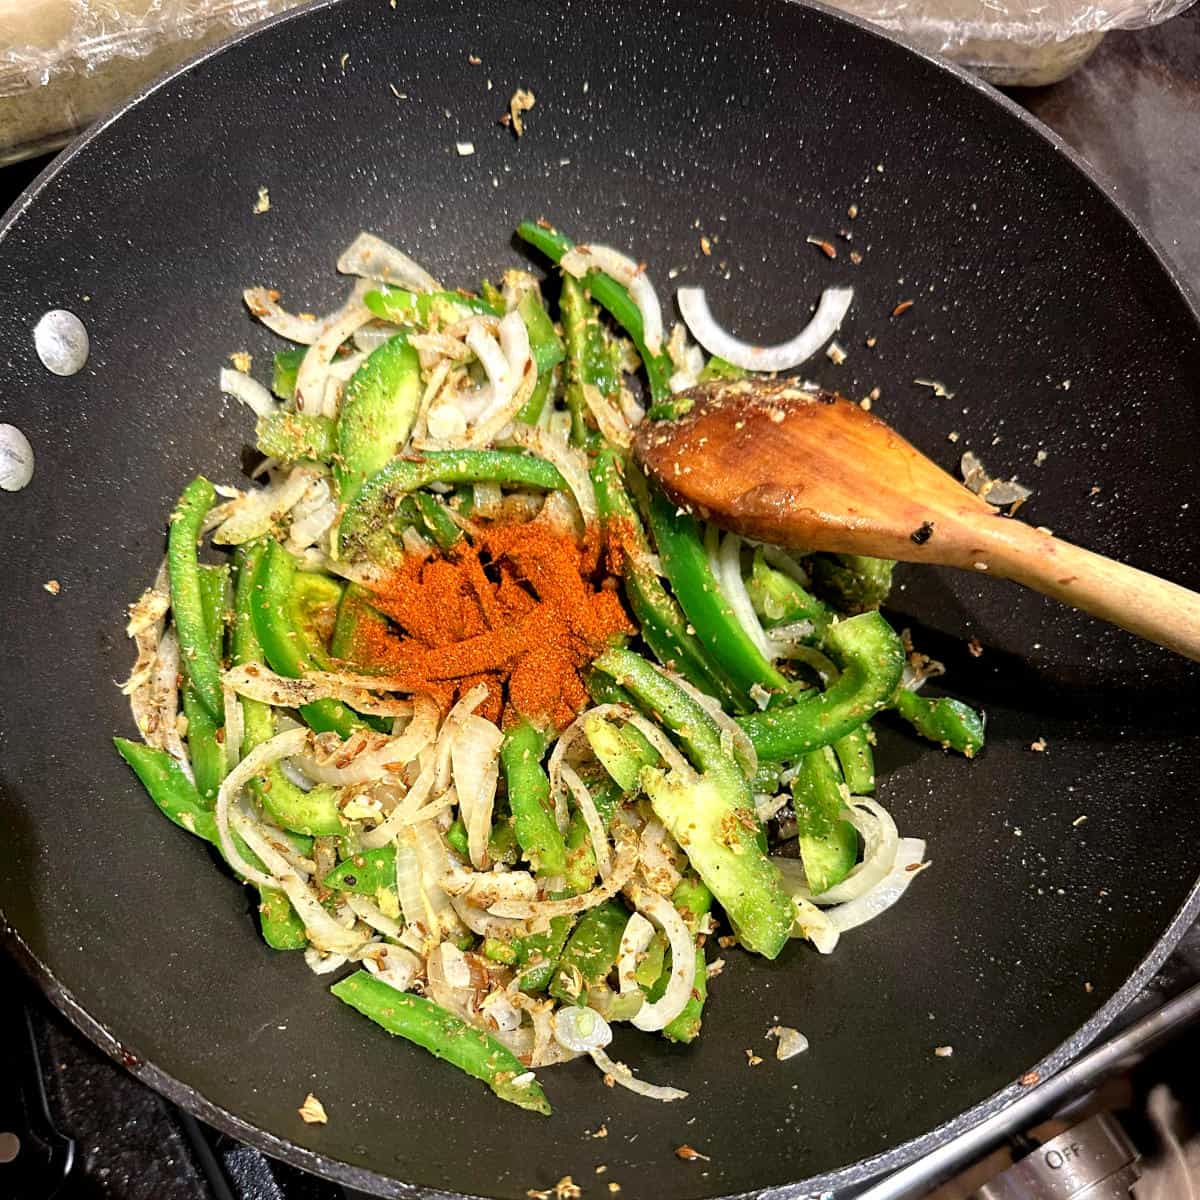 Vegetables and spices added to wok for chilli tofu.